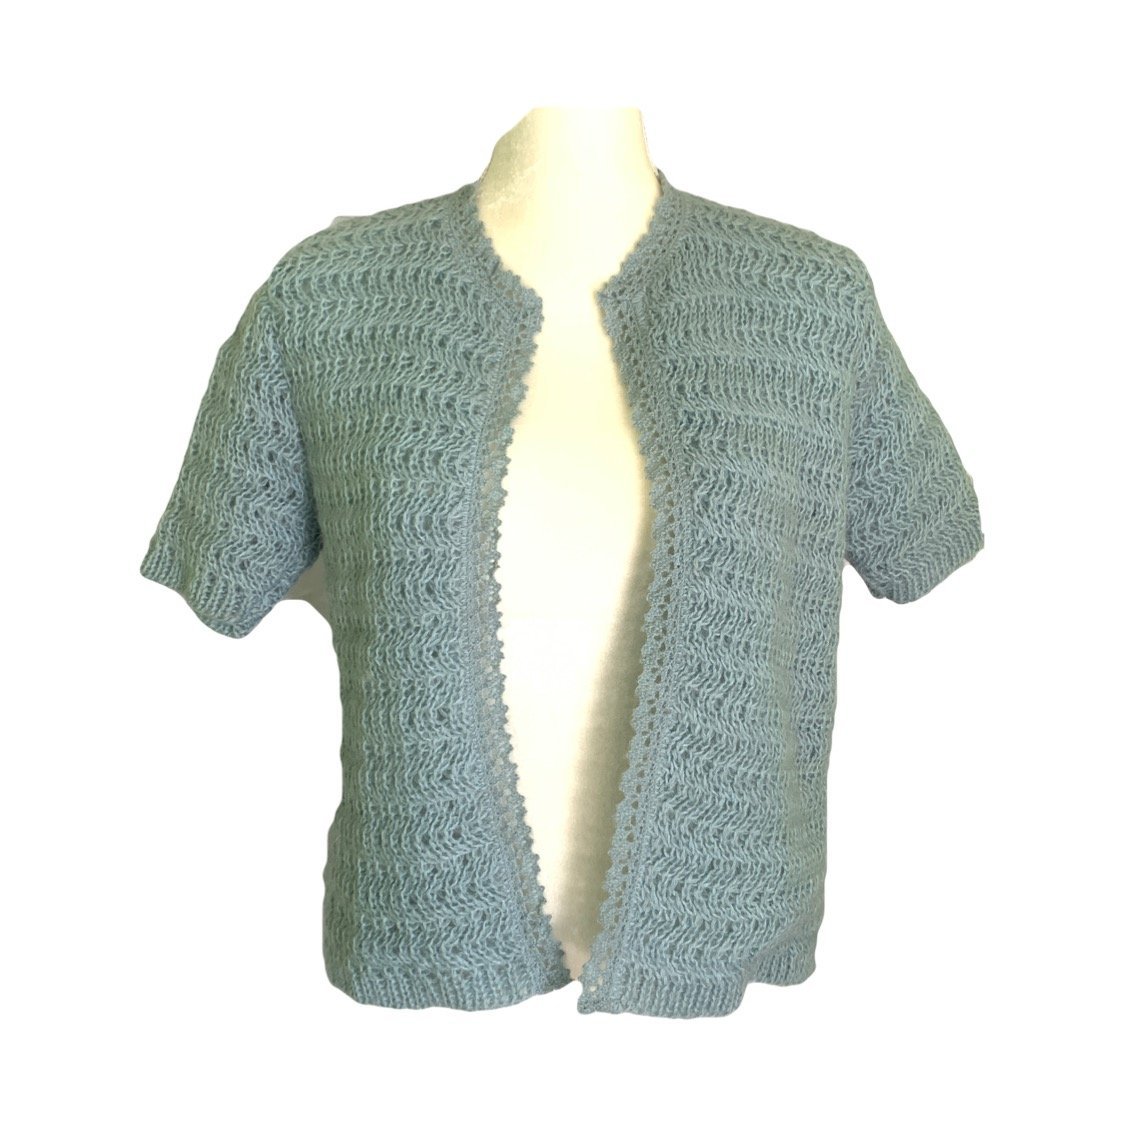 Vintage Blue Cardigan with Mohair Lace Knit Design by Neusteters of De